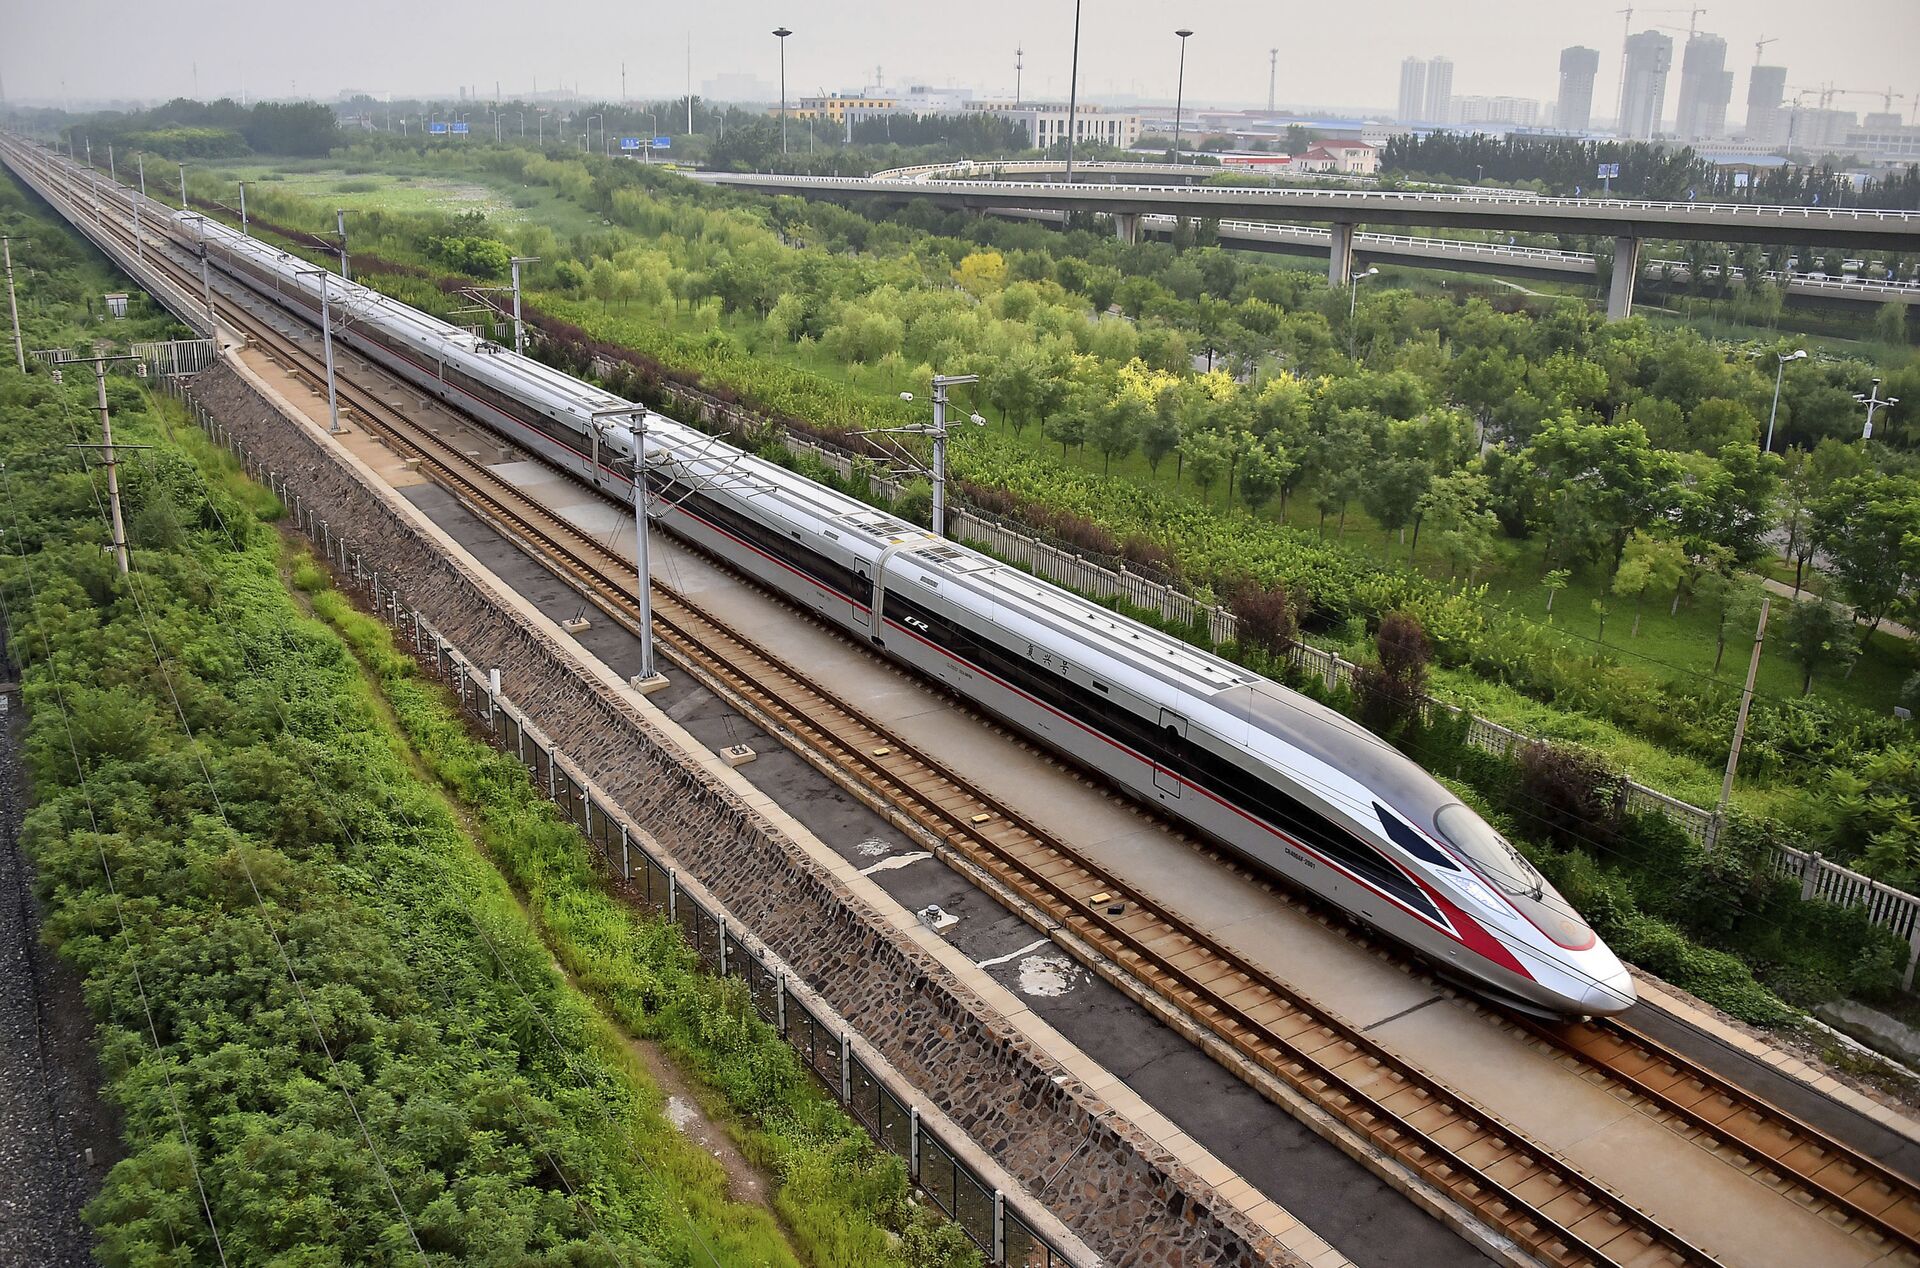 In this Aug. 21, 2017 photo released by China's Xinhua News Agency, a Fuxing bullet train, China's latest high-speed train, arrives at a train station in northern China's Tianjin Municipality - Sputnik International, 1920, 11.11.2021